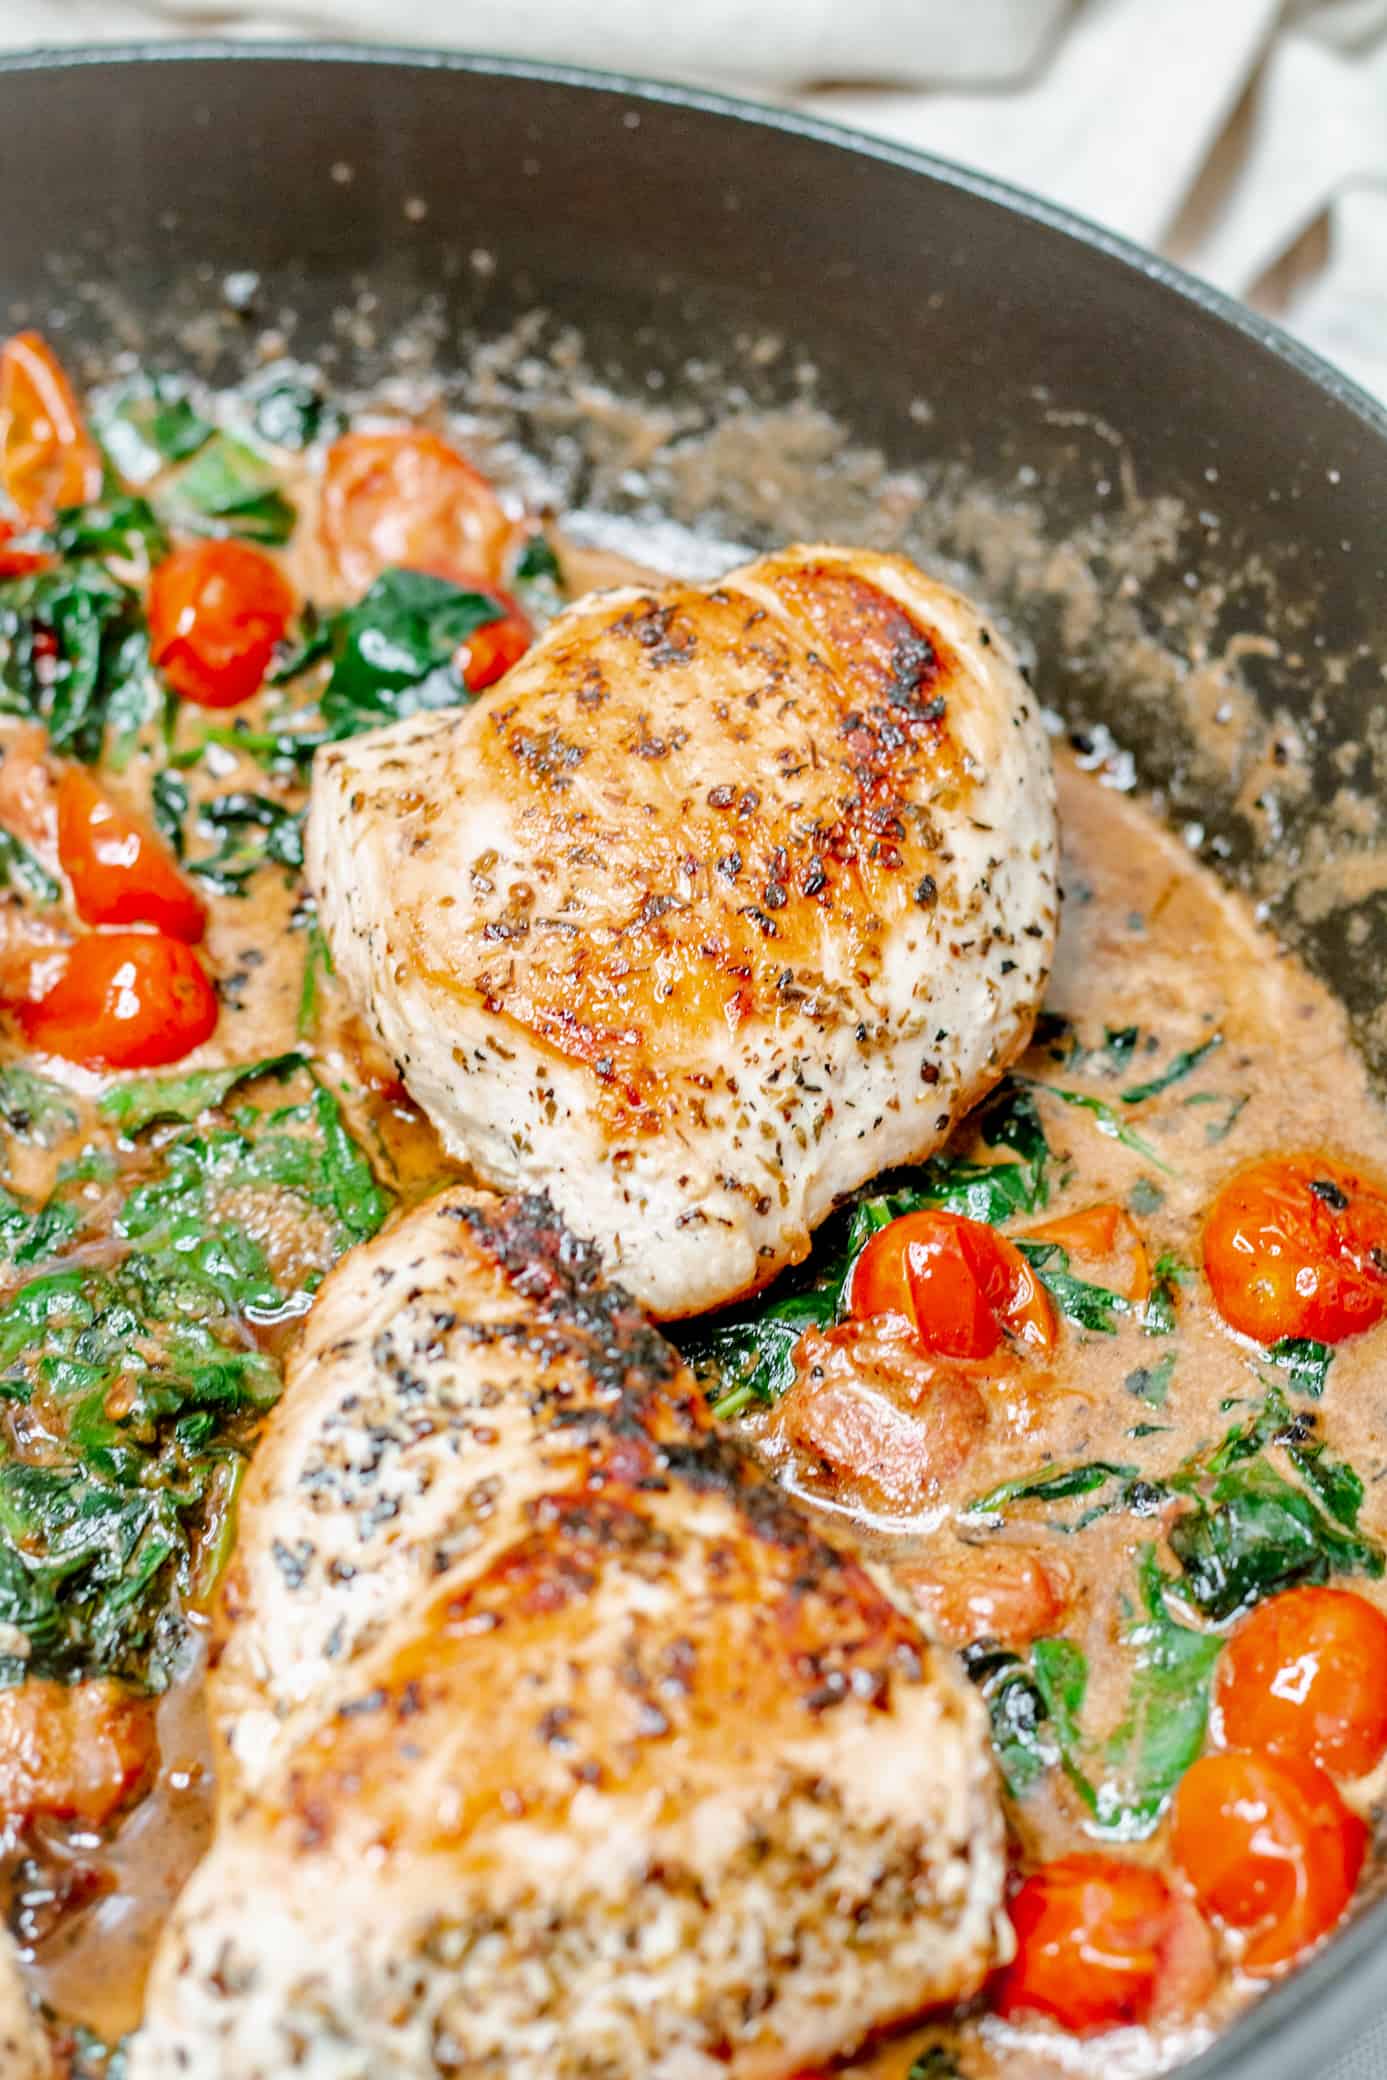 Overhead view of a pan filled with creamy tuscan chicken, wilted spinach, and grape tomatoes